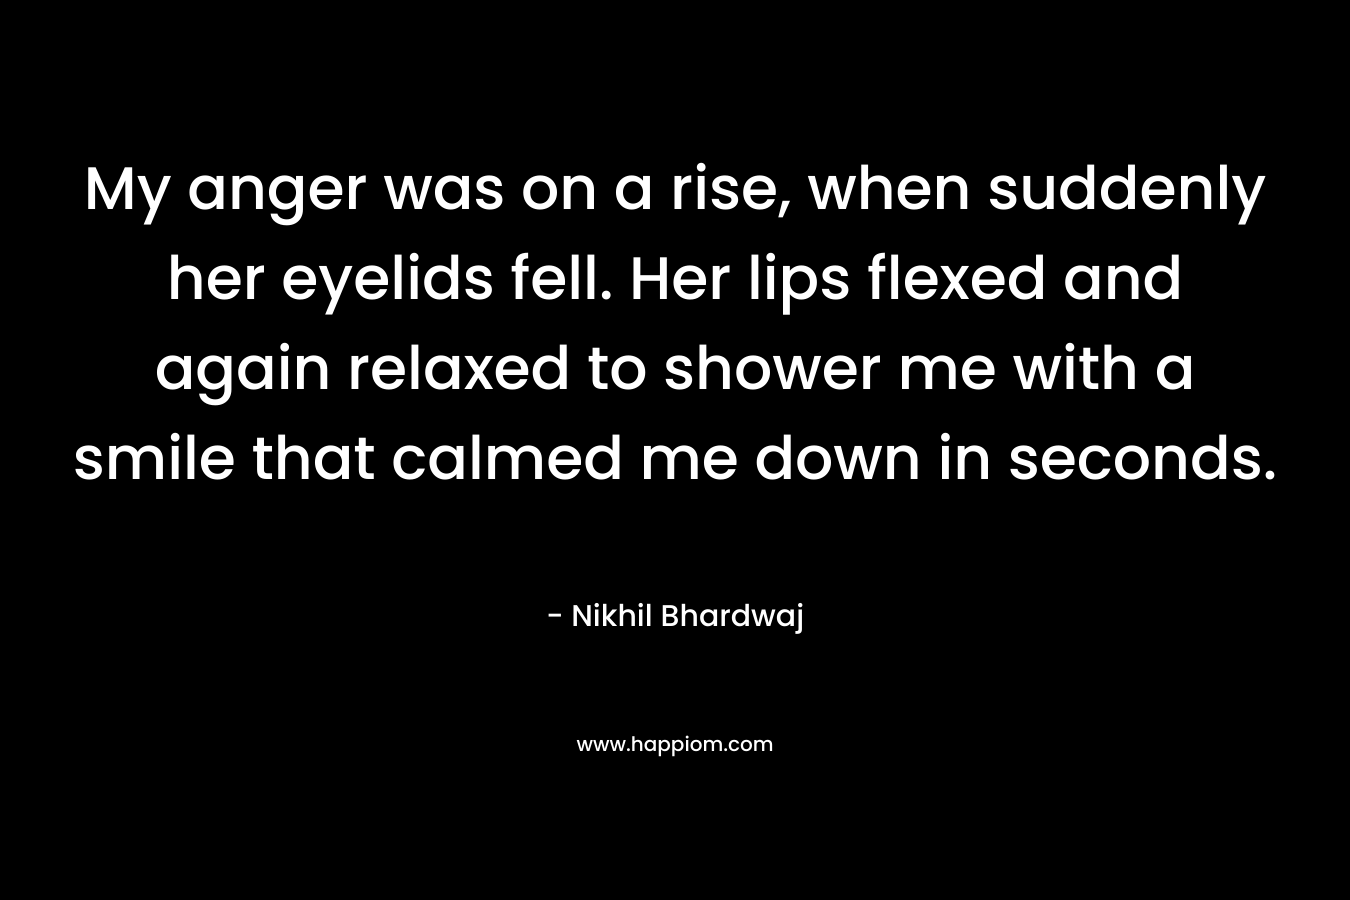 My anger was on a rise, when suddenly her eyelids fell. Her lips flexed and again relaxed to shower me with a smile that calmed me down in seconds. – Nikhil Bhardwaj